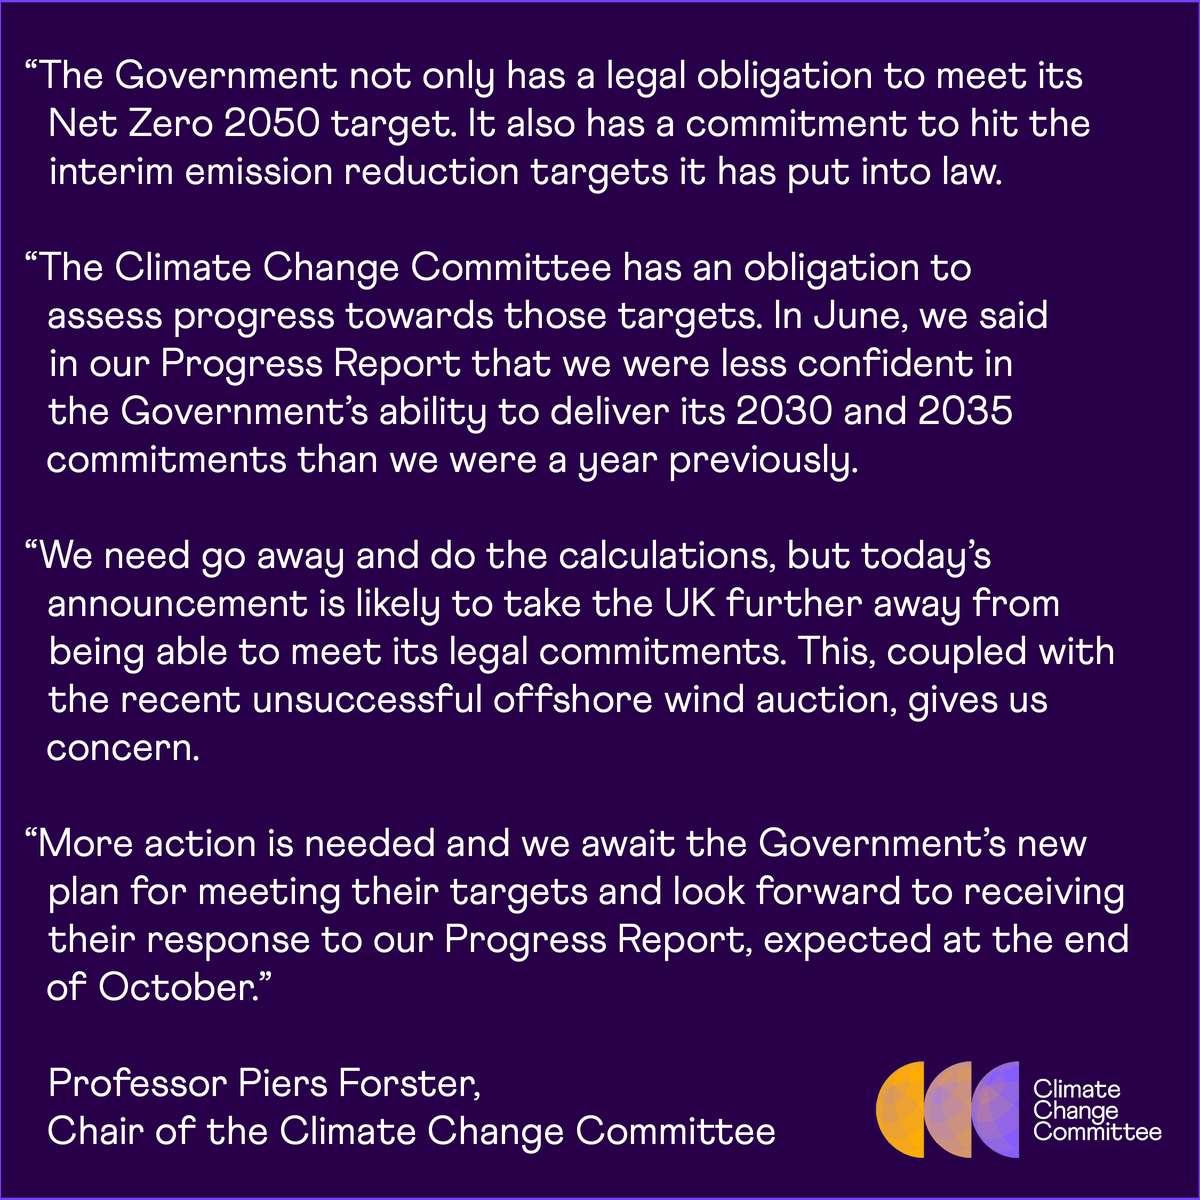 The UK Government has announced a new approach to reaching Net Zero. The CCC has issued its response.